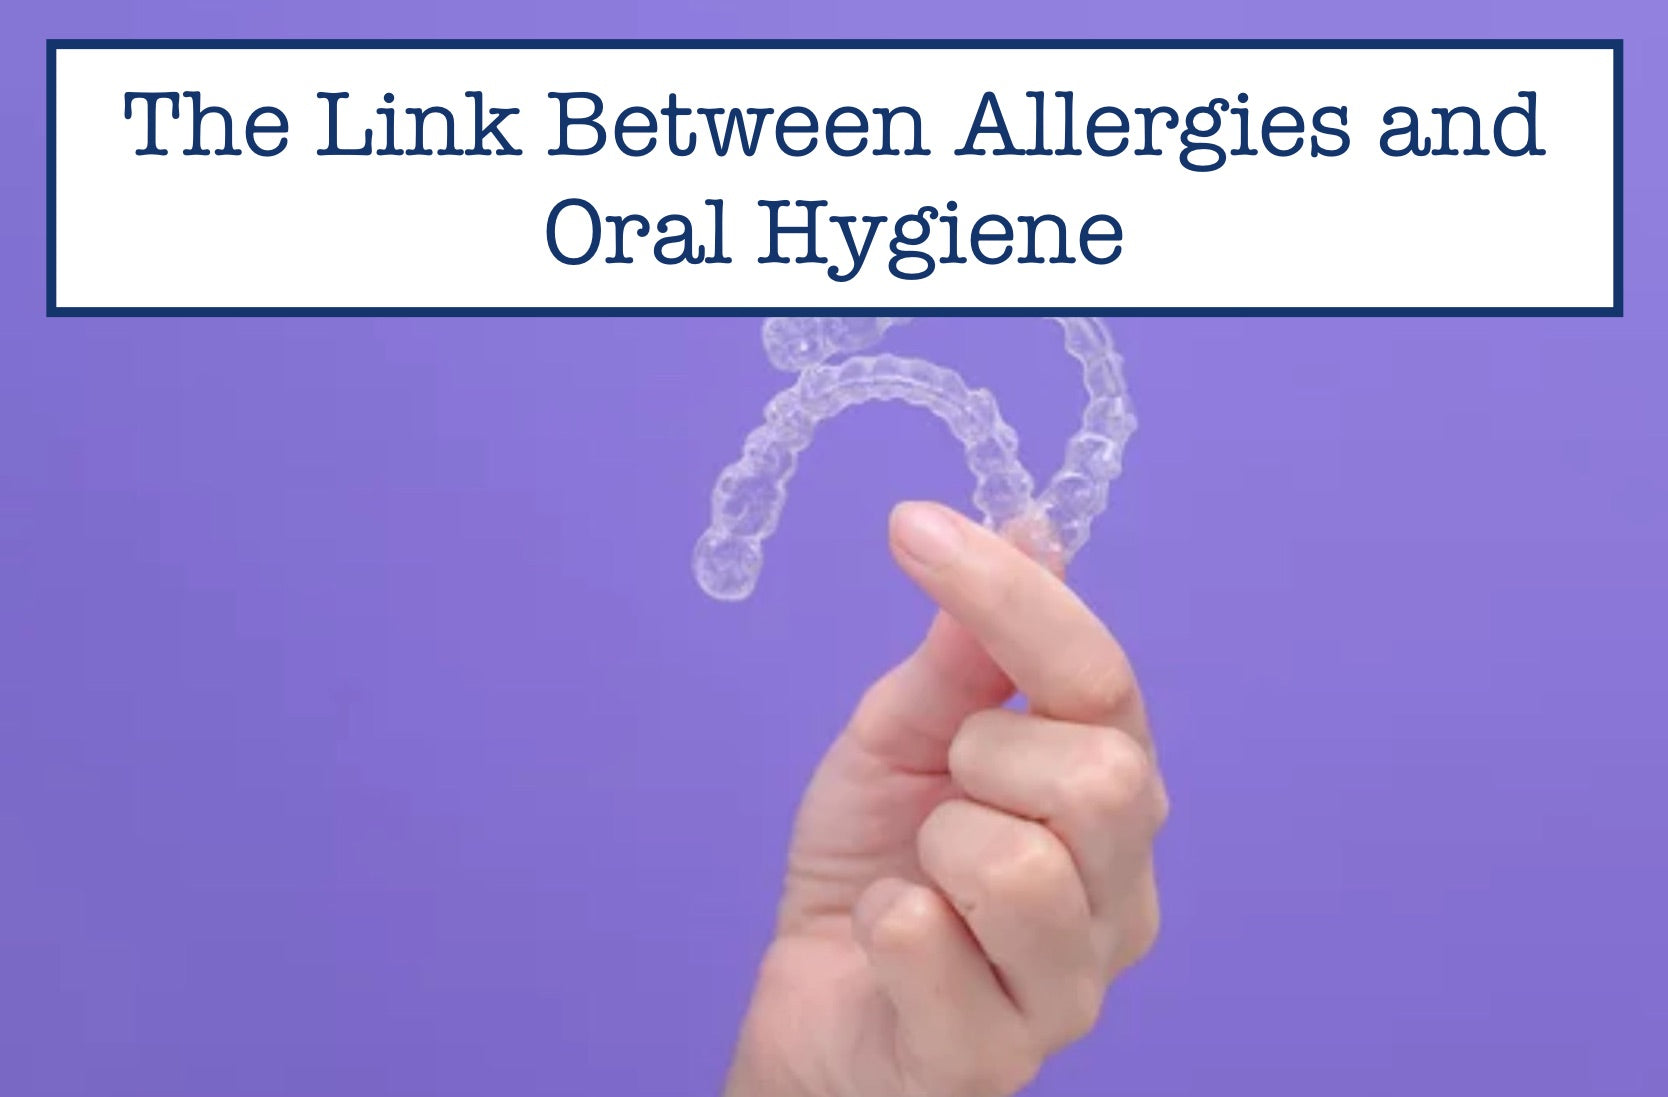 The Link Between Allergies and Oral Hygiene